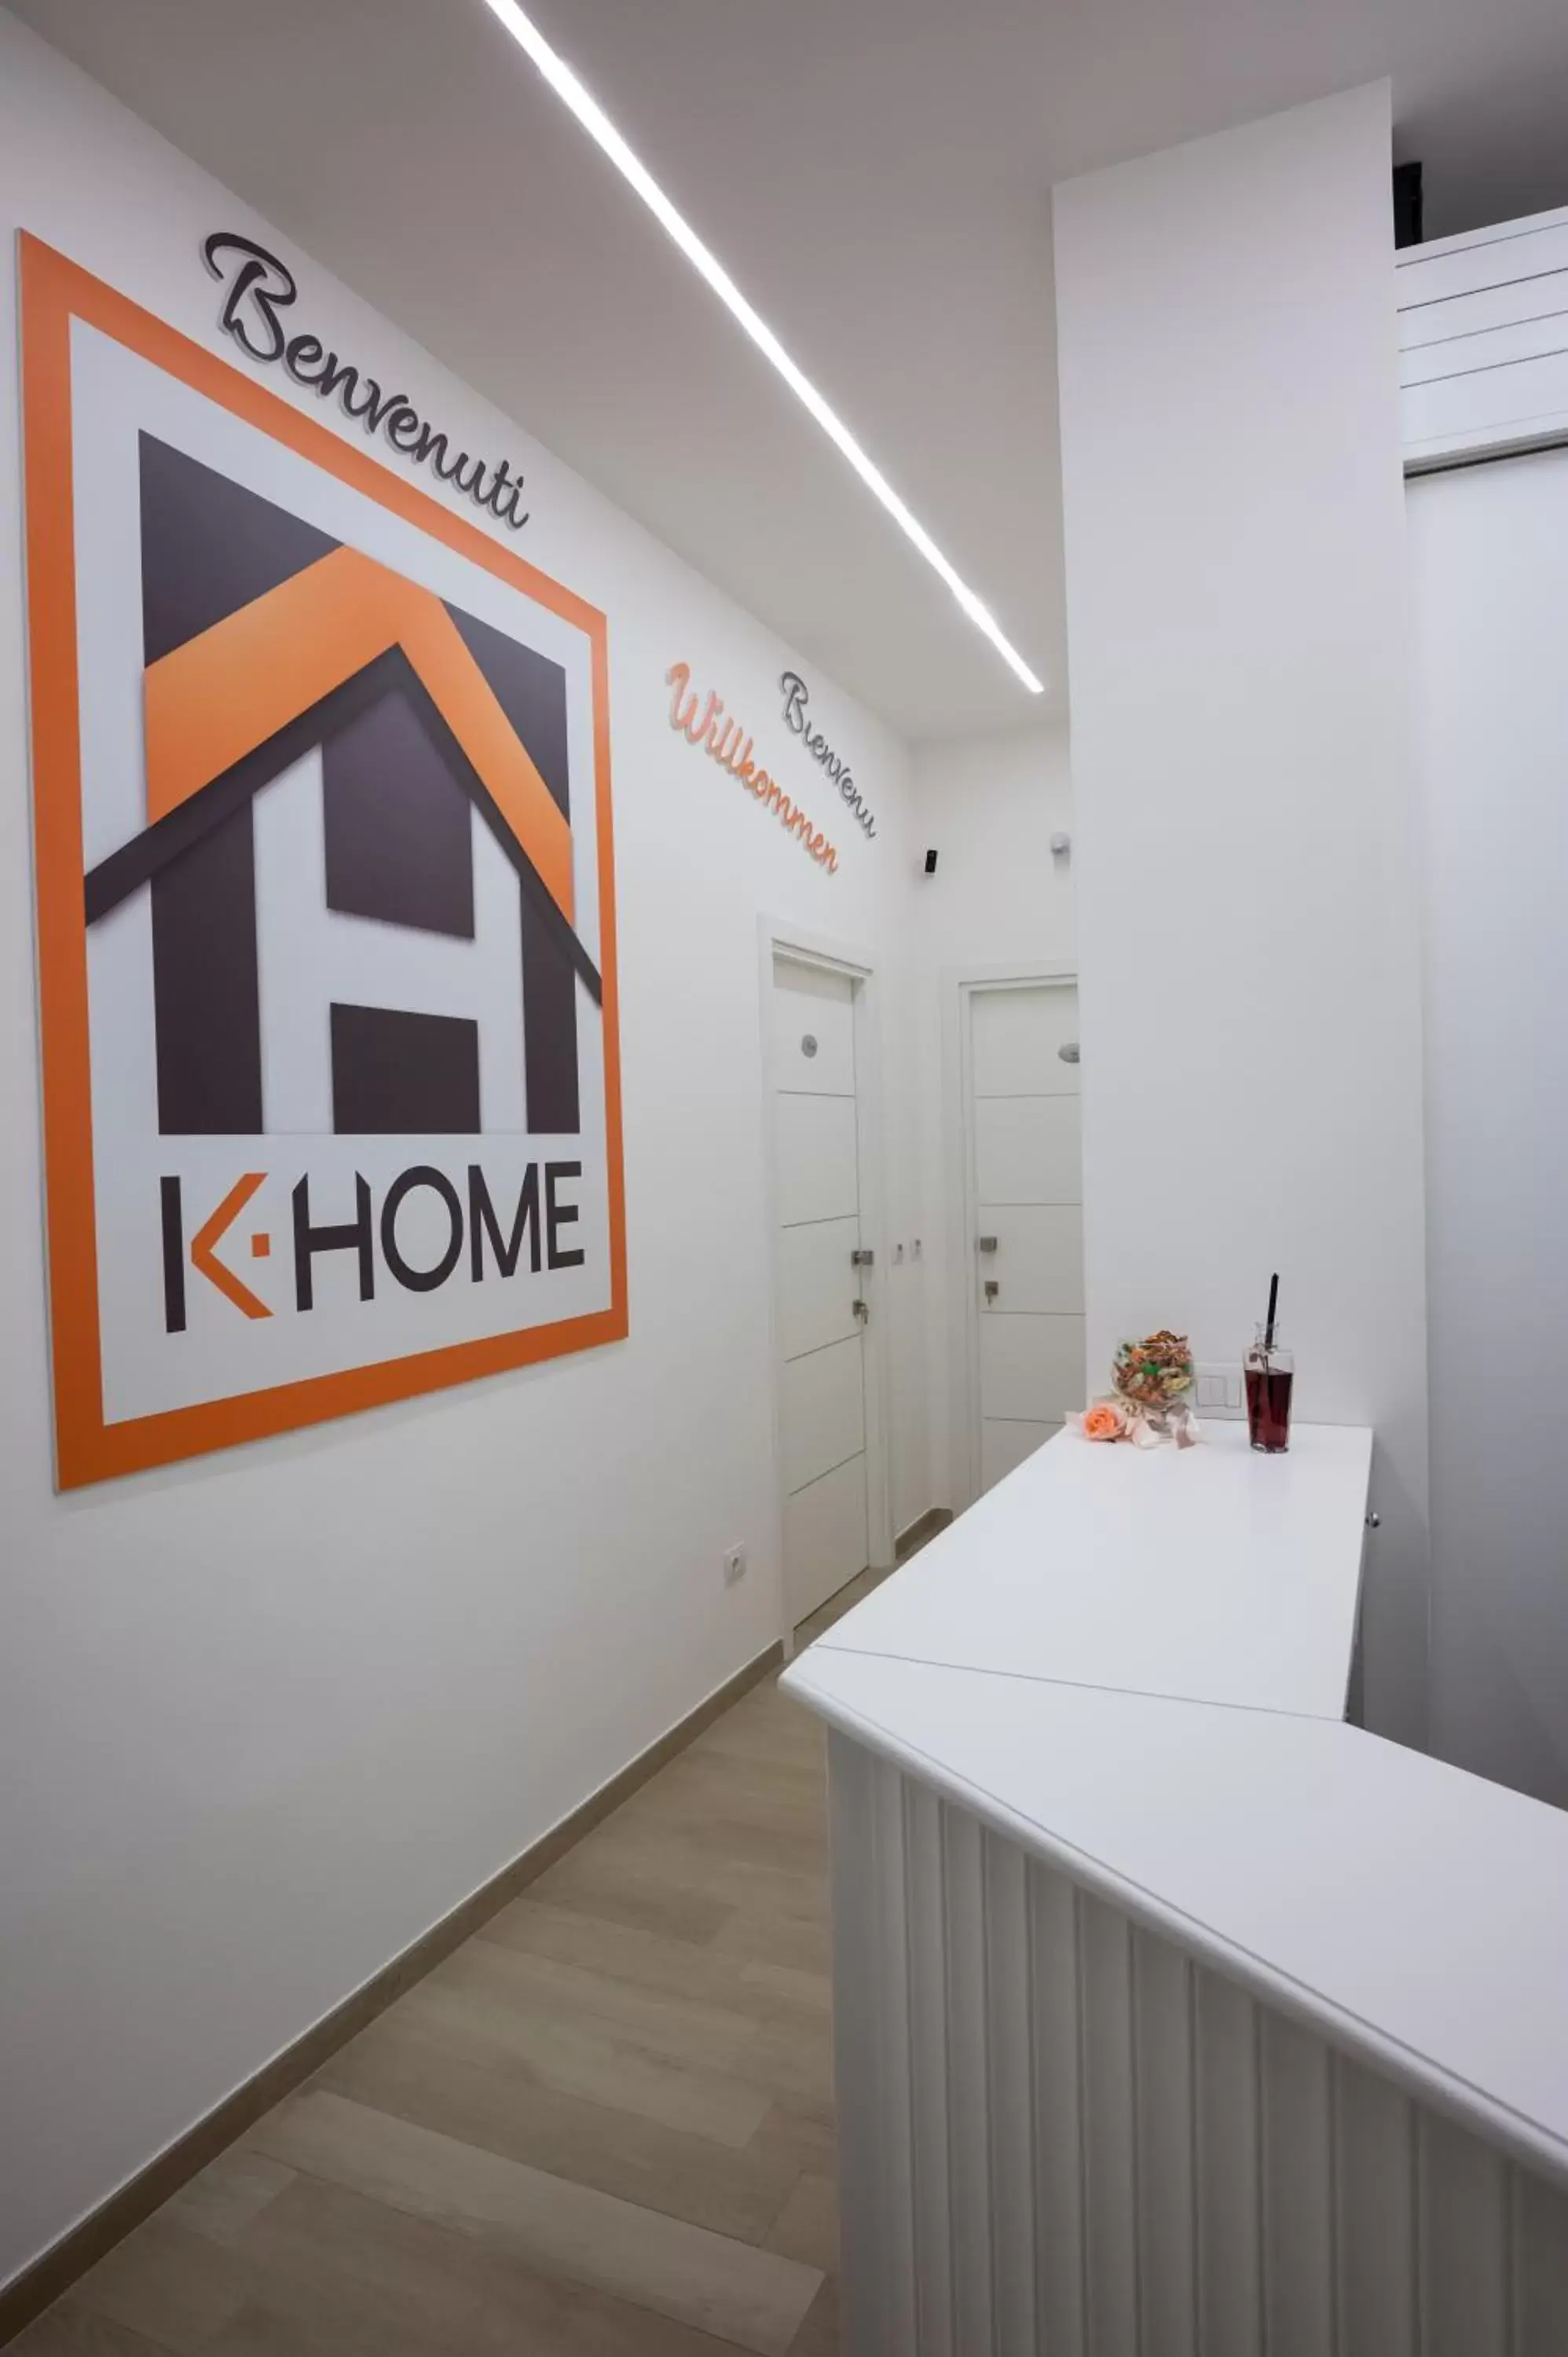 Property logo or sign in K-Home